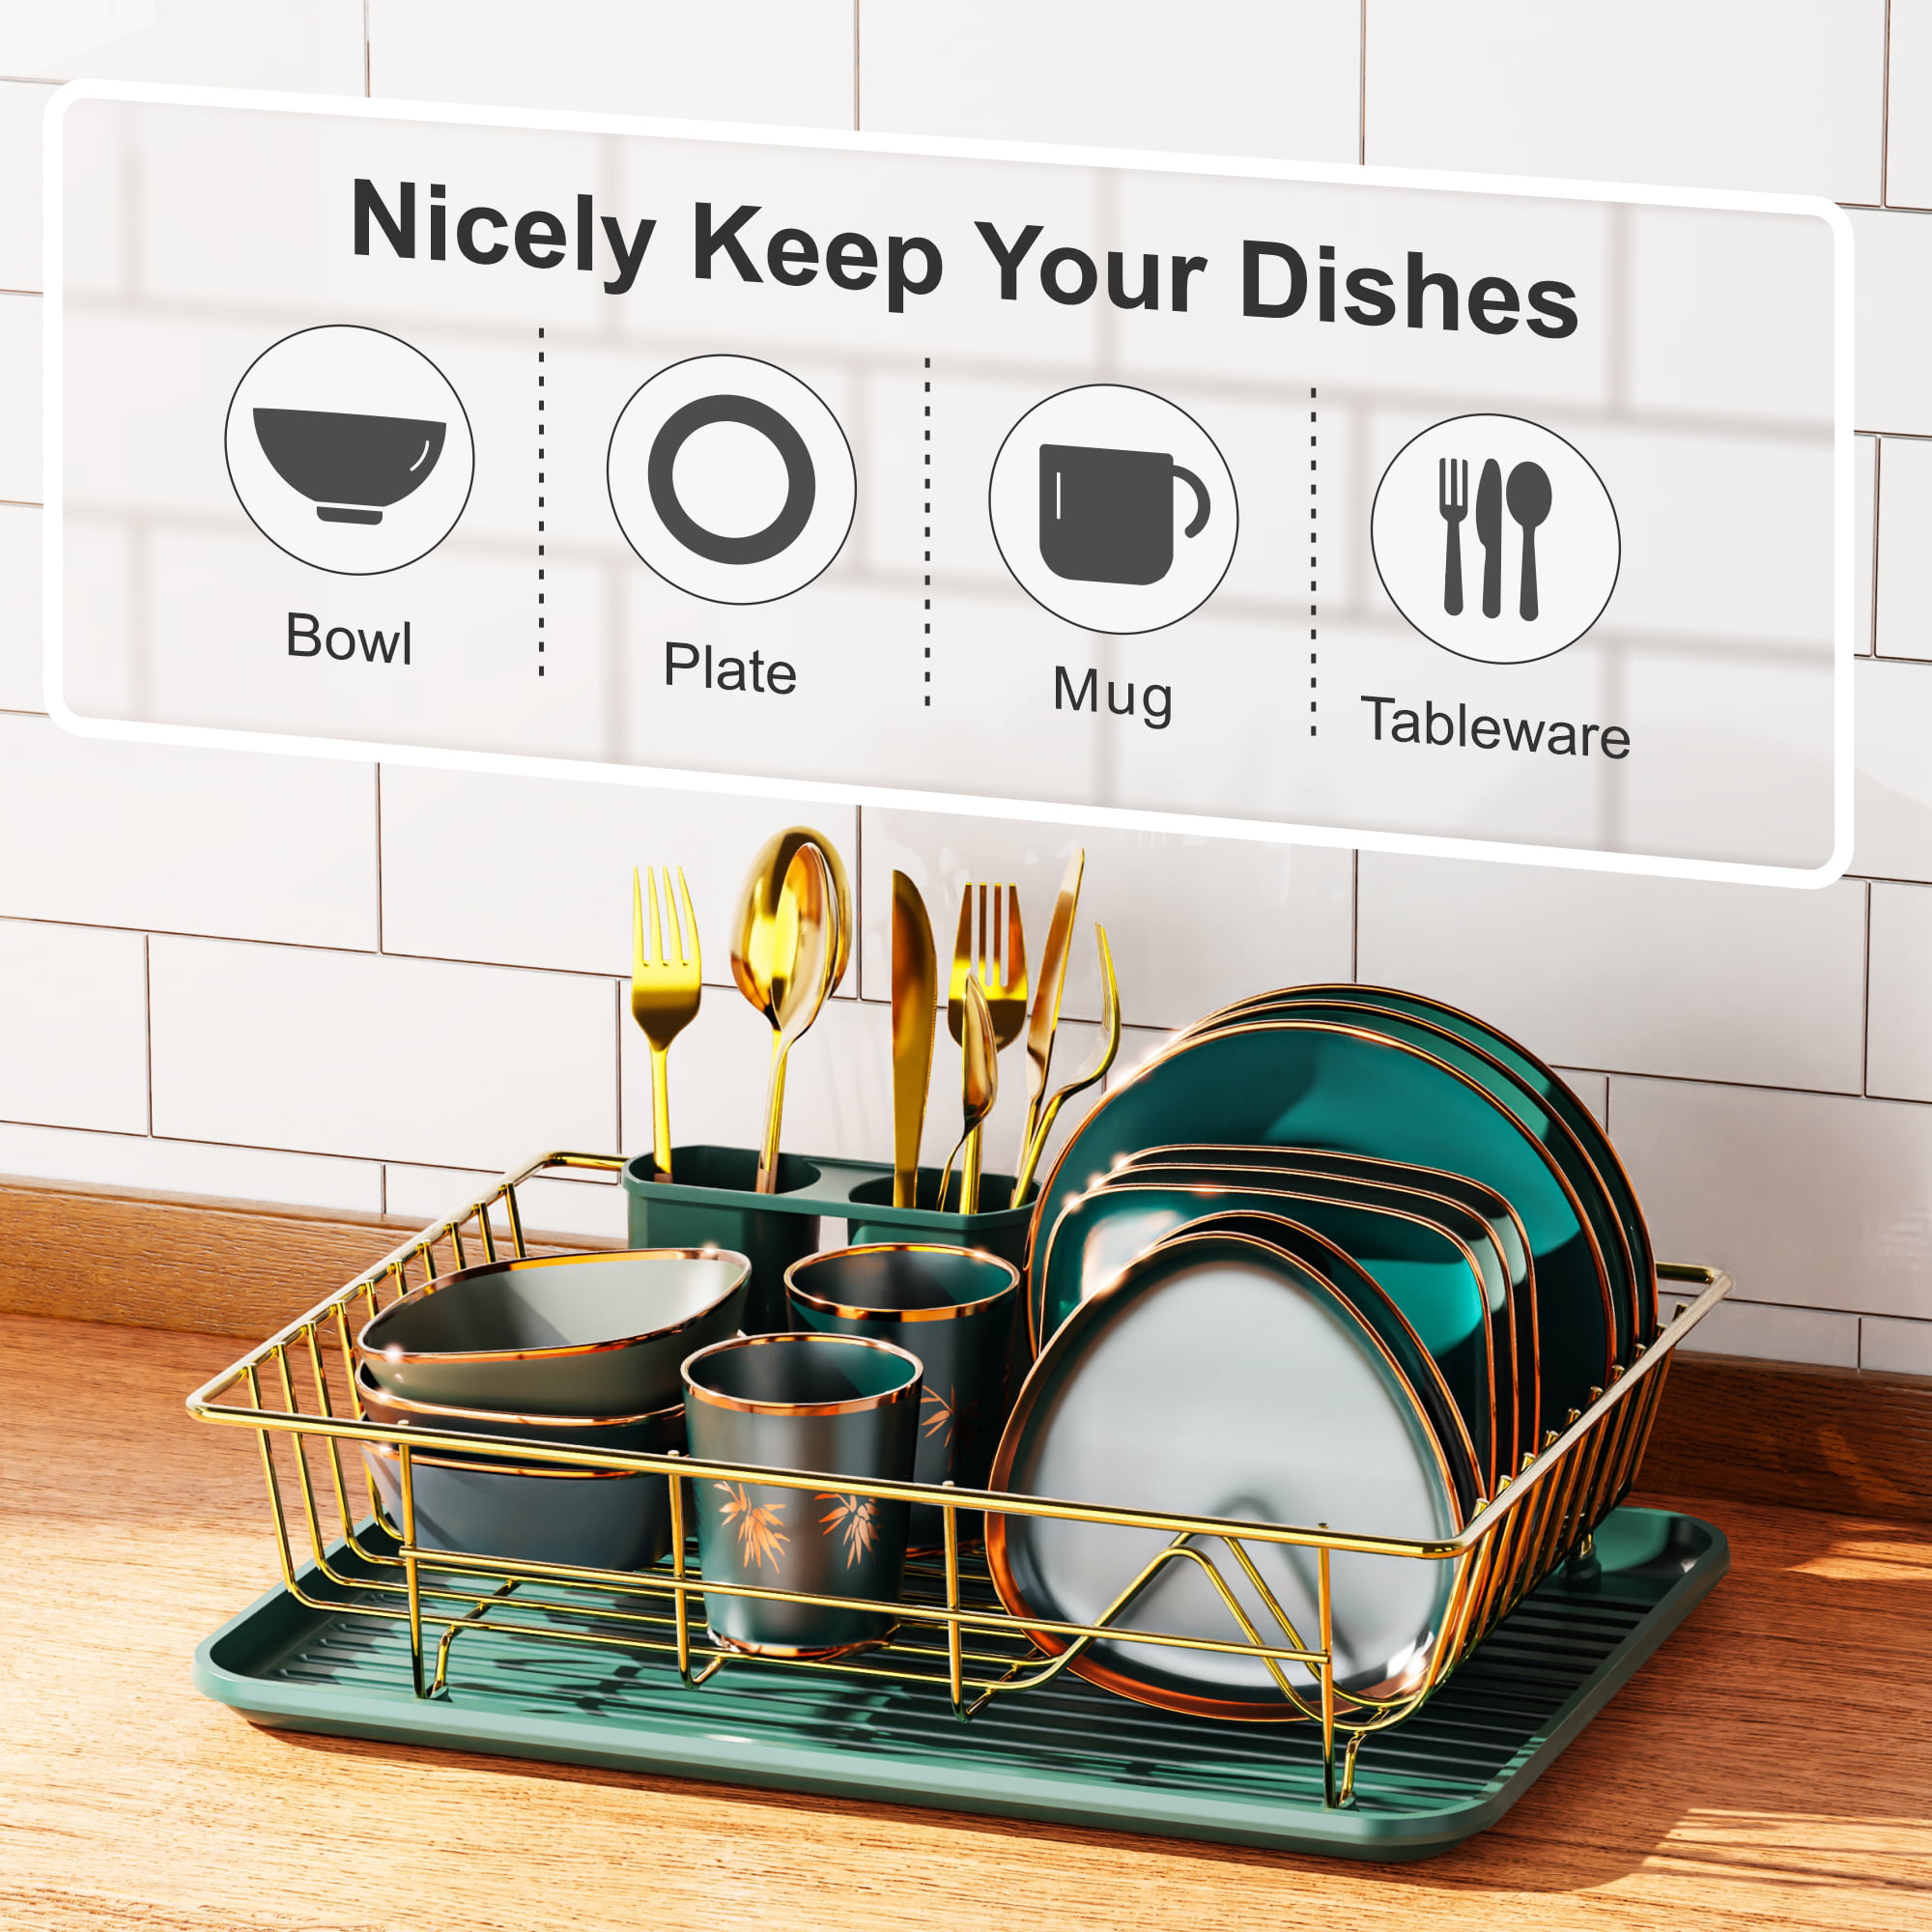 Kitchen utensil and dish drainer stand and drainer black - DVINA